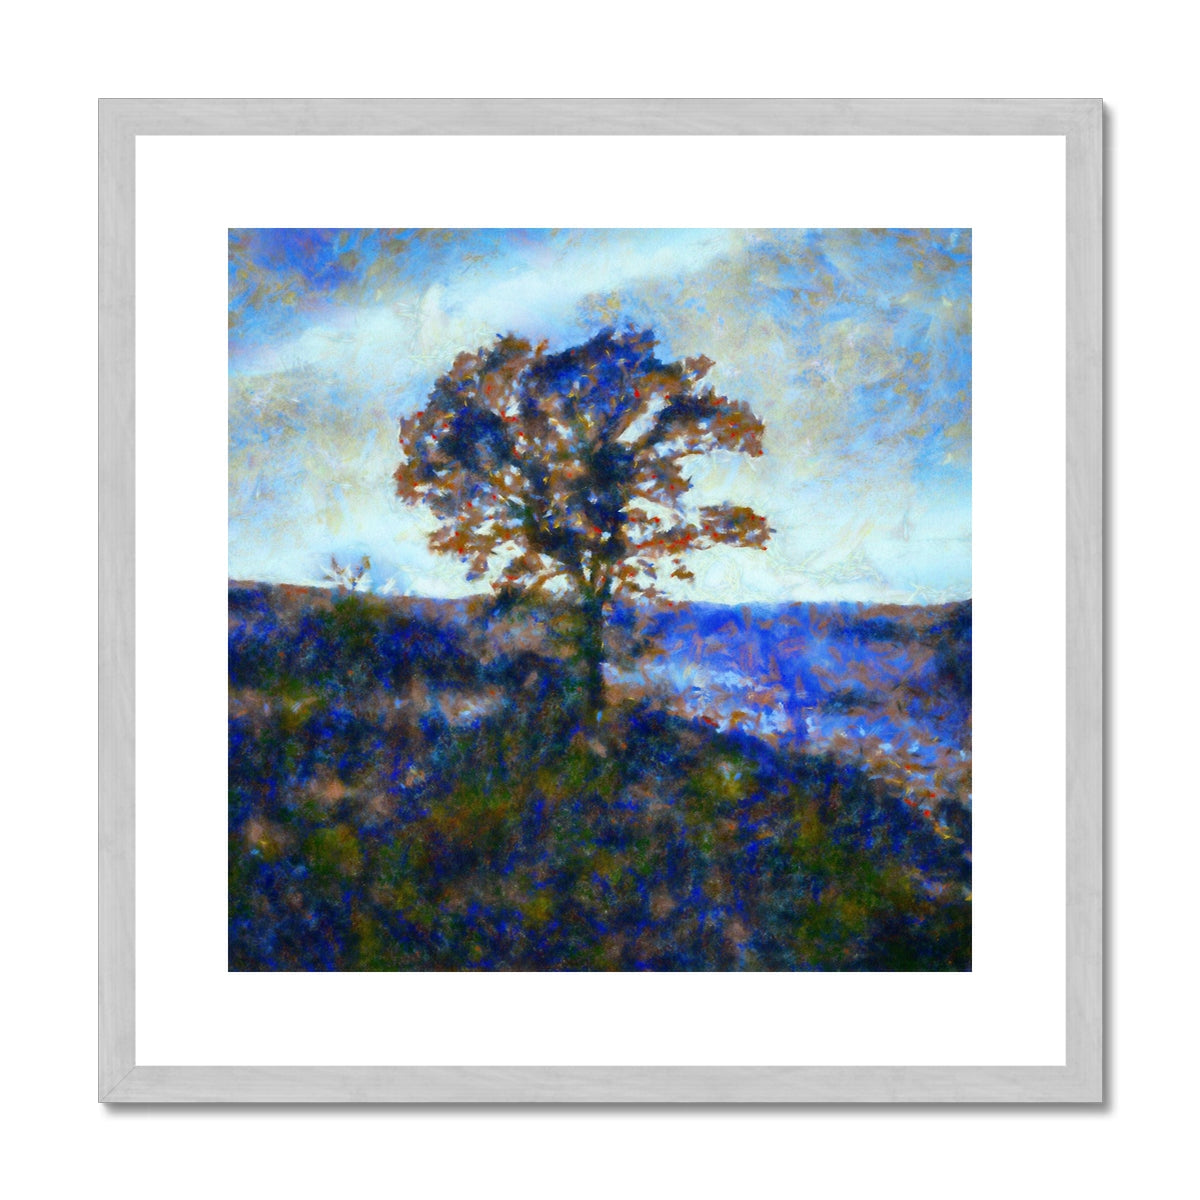 A Winter Highland Tree Painting | Antique Framed & Mounted Prints From Scotland-Antique Framed & Mounted Prints-Scottish Highlands & Lowlands Art Gallery-20"x20"-Silver Frame-Paintings, Prints, Homeware, Art Gifts From Scotland By Scottish Artist Kevin Hunter